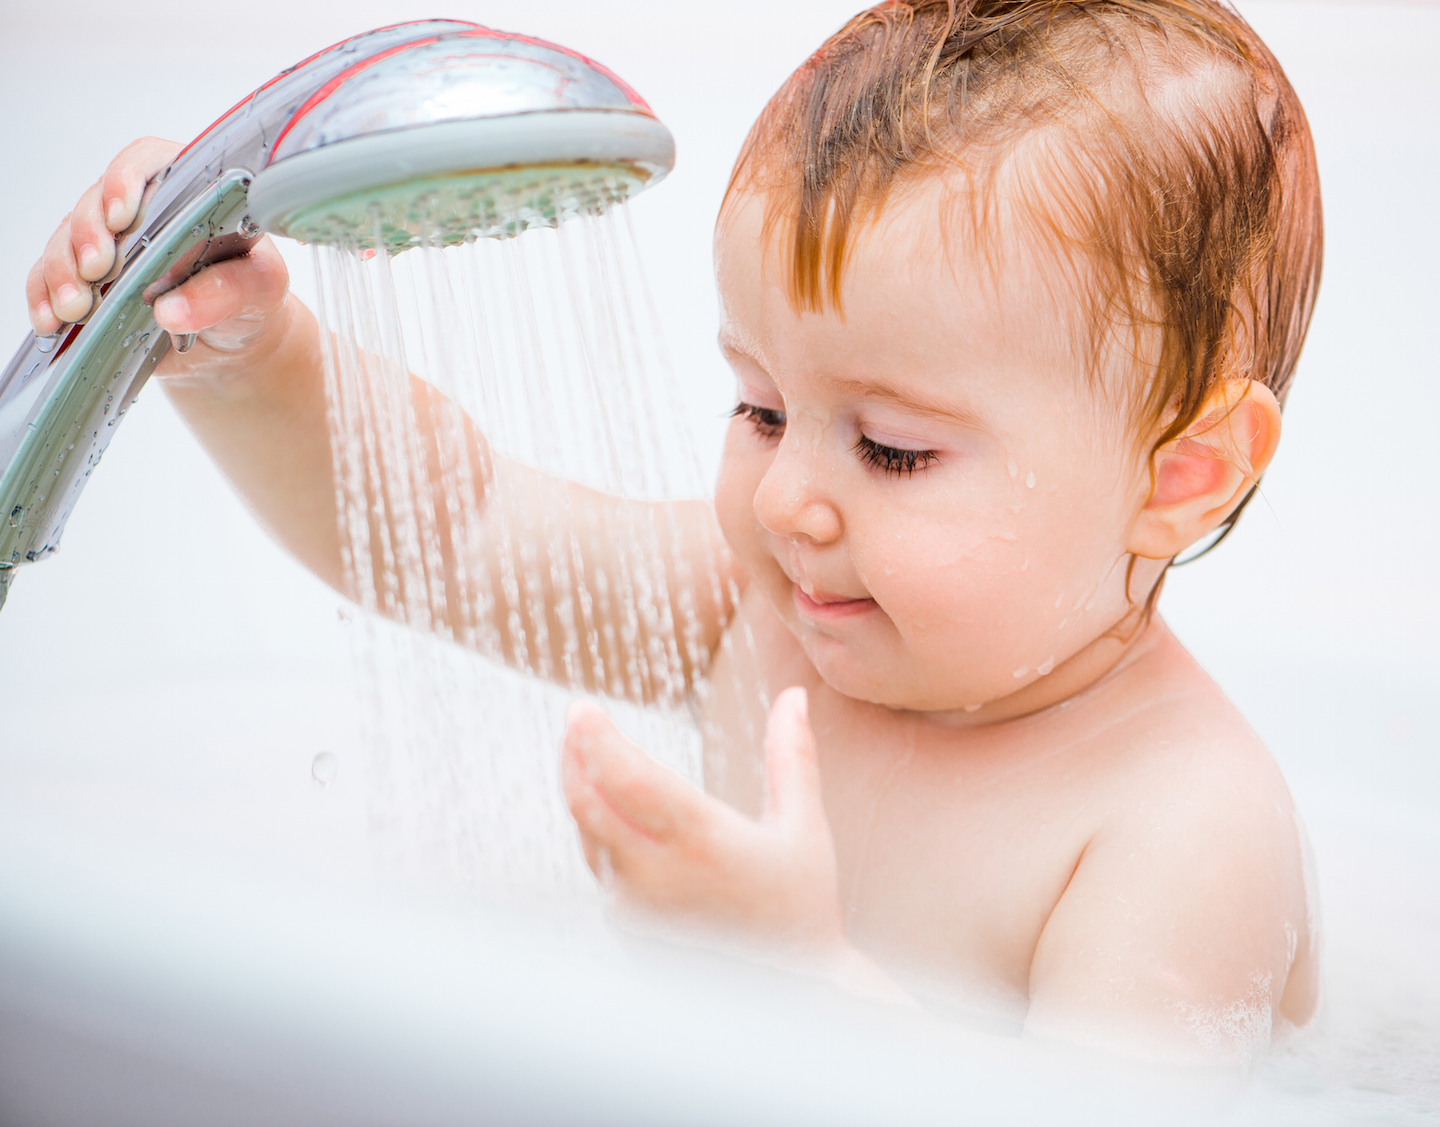 Faqs On Bathing Your Baby